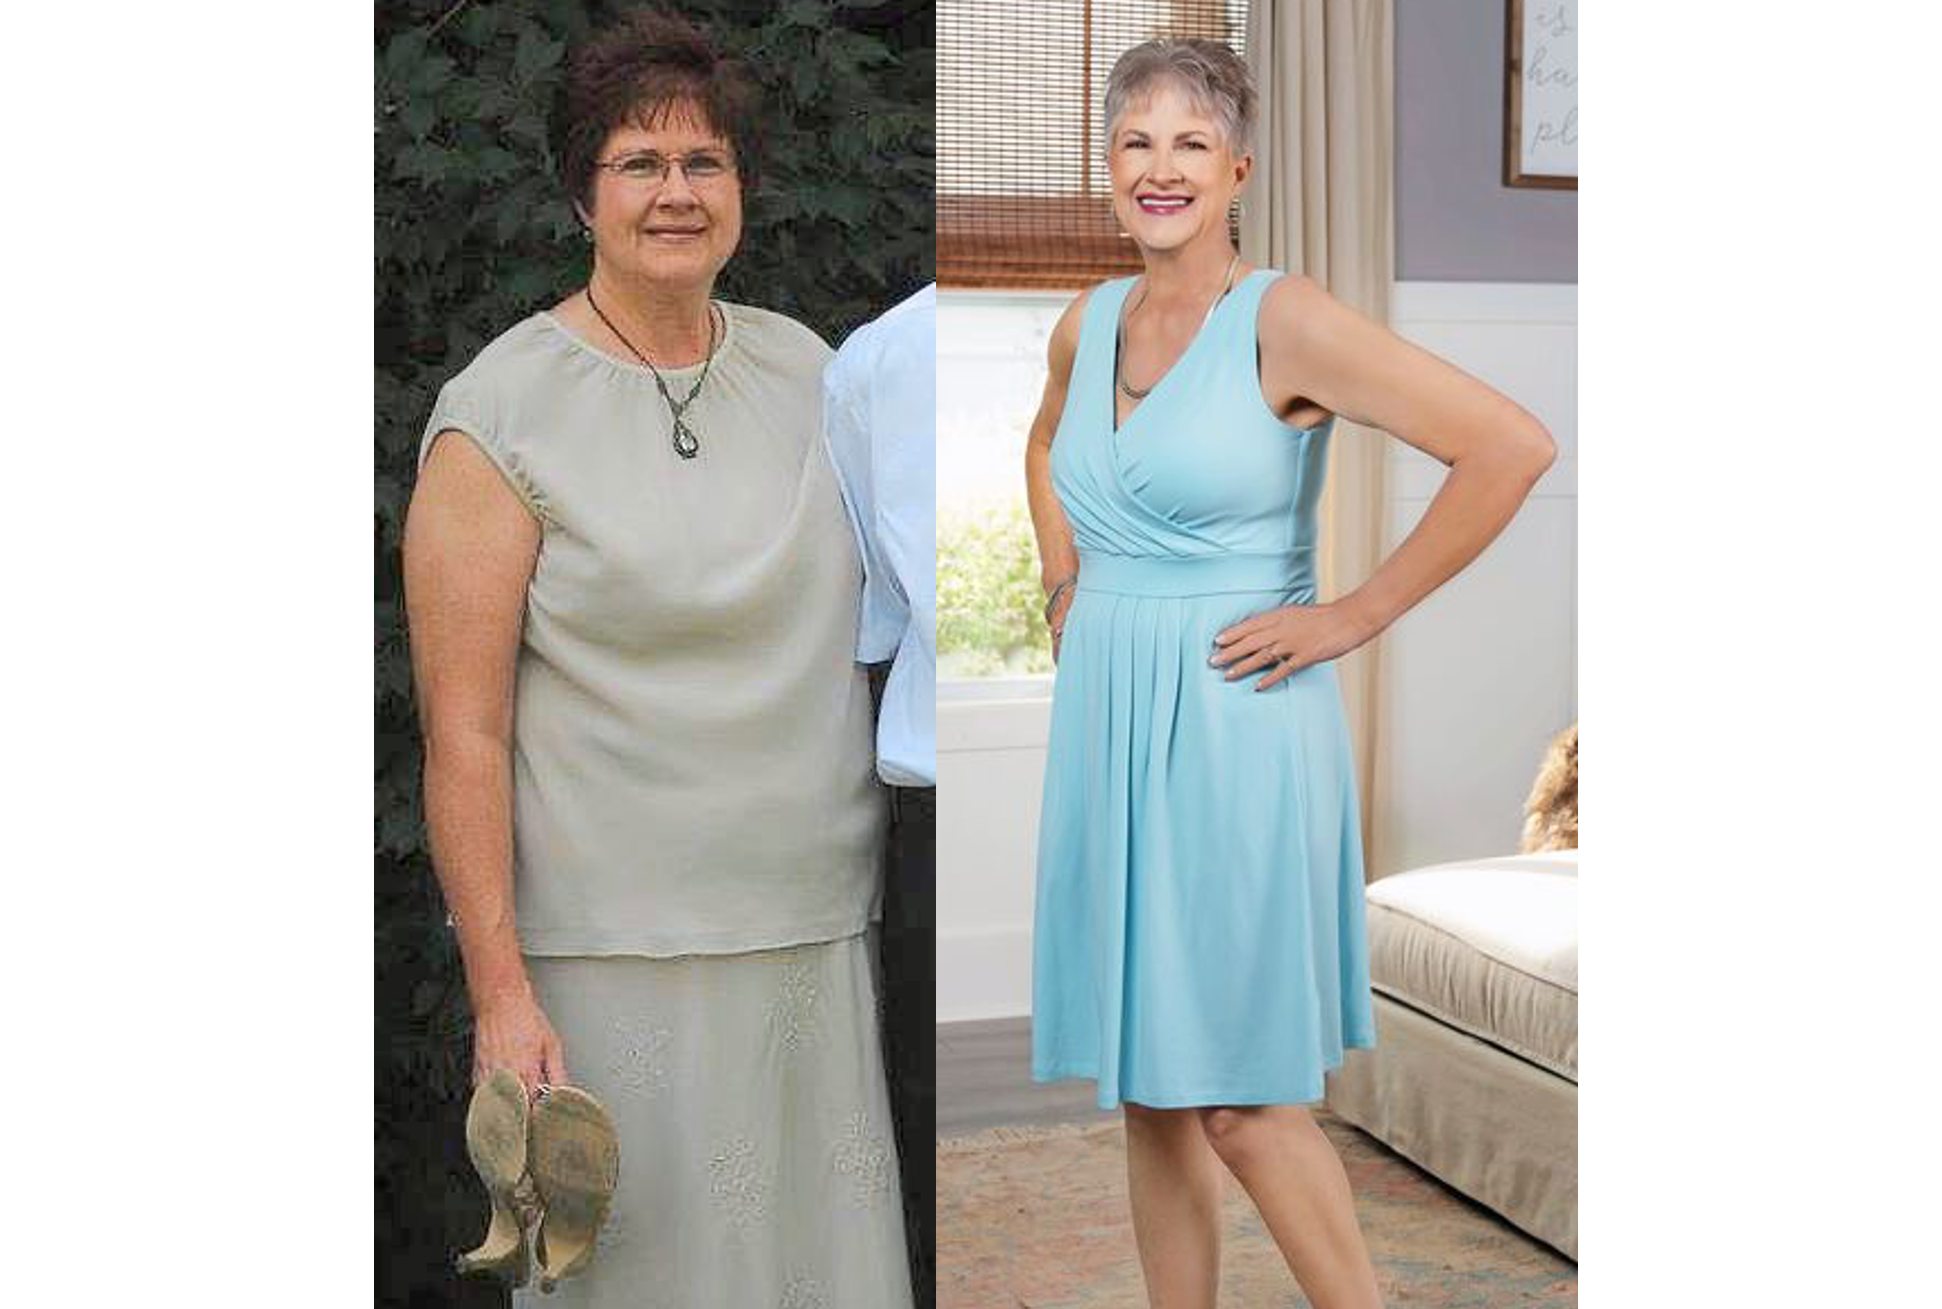 Pam Hambach, 62, before (L) and after (R)